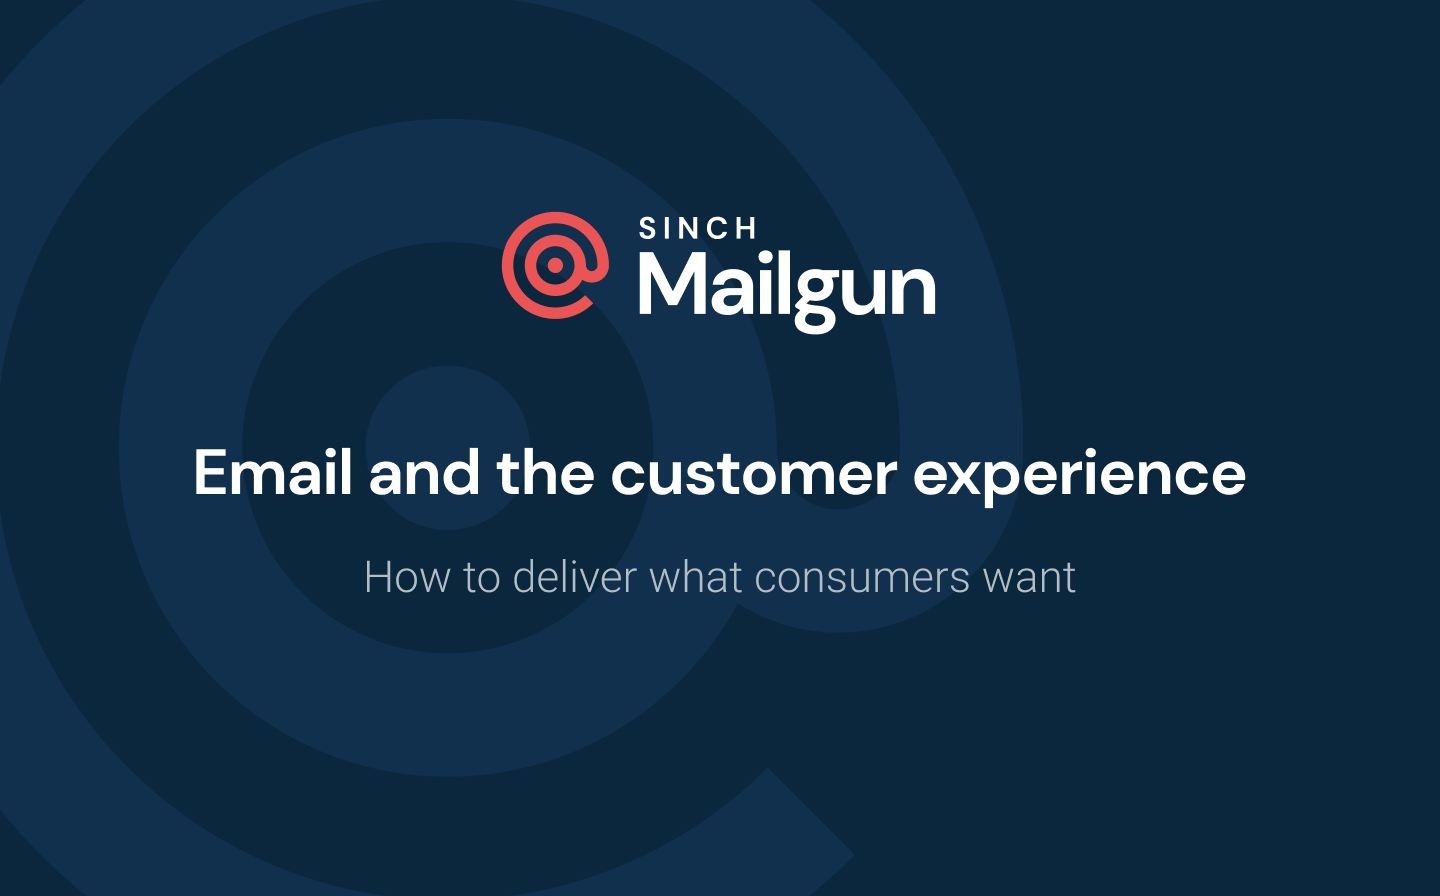 Email and the customer experience title card